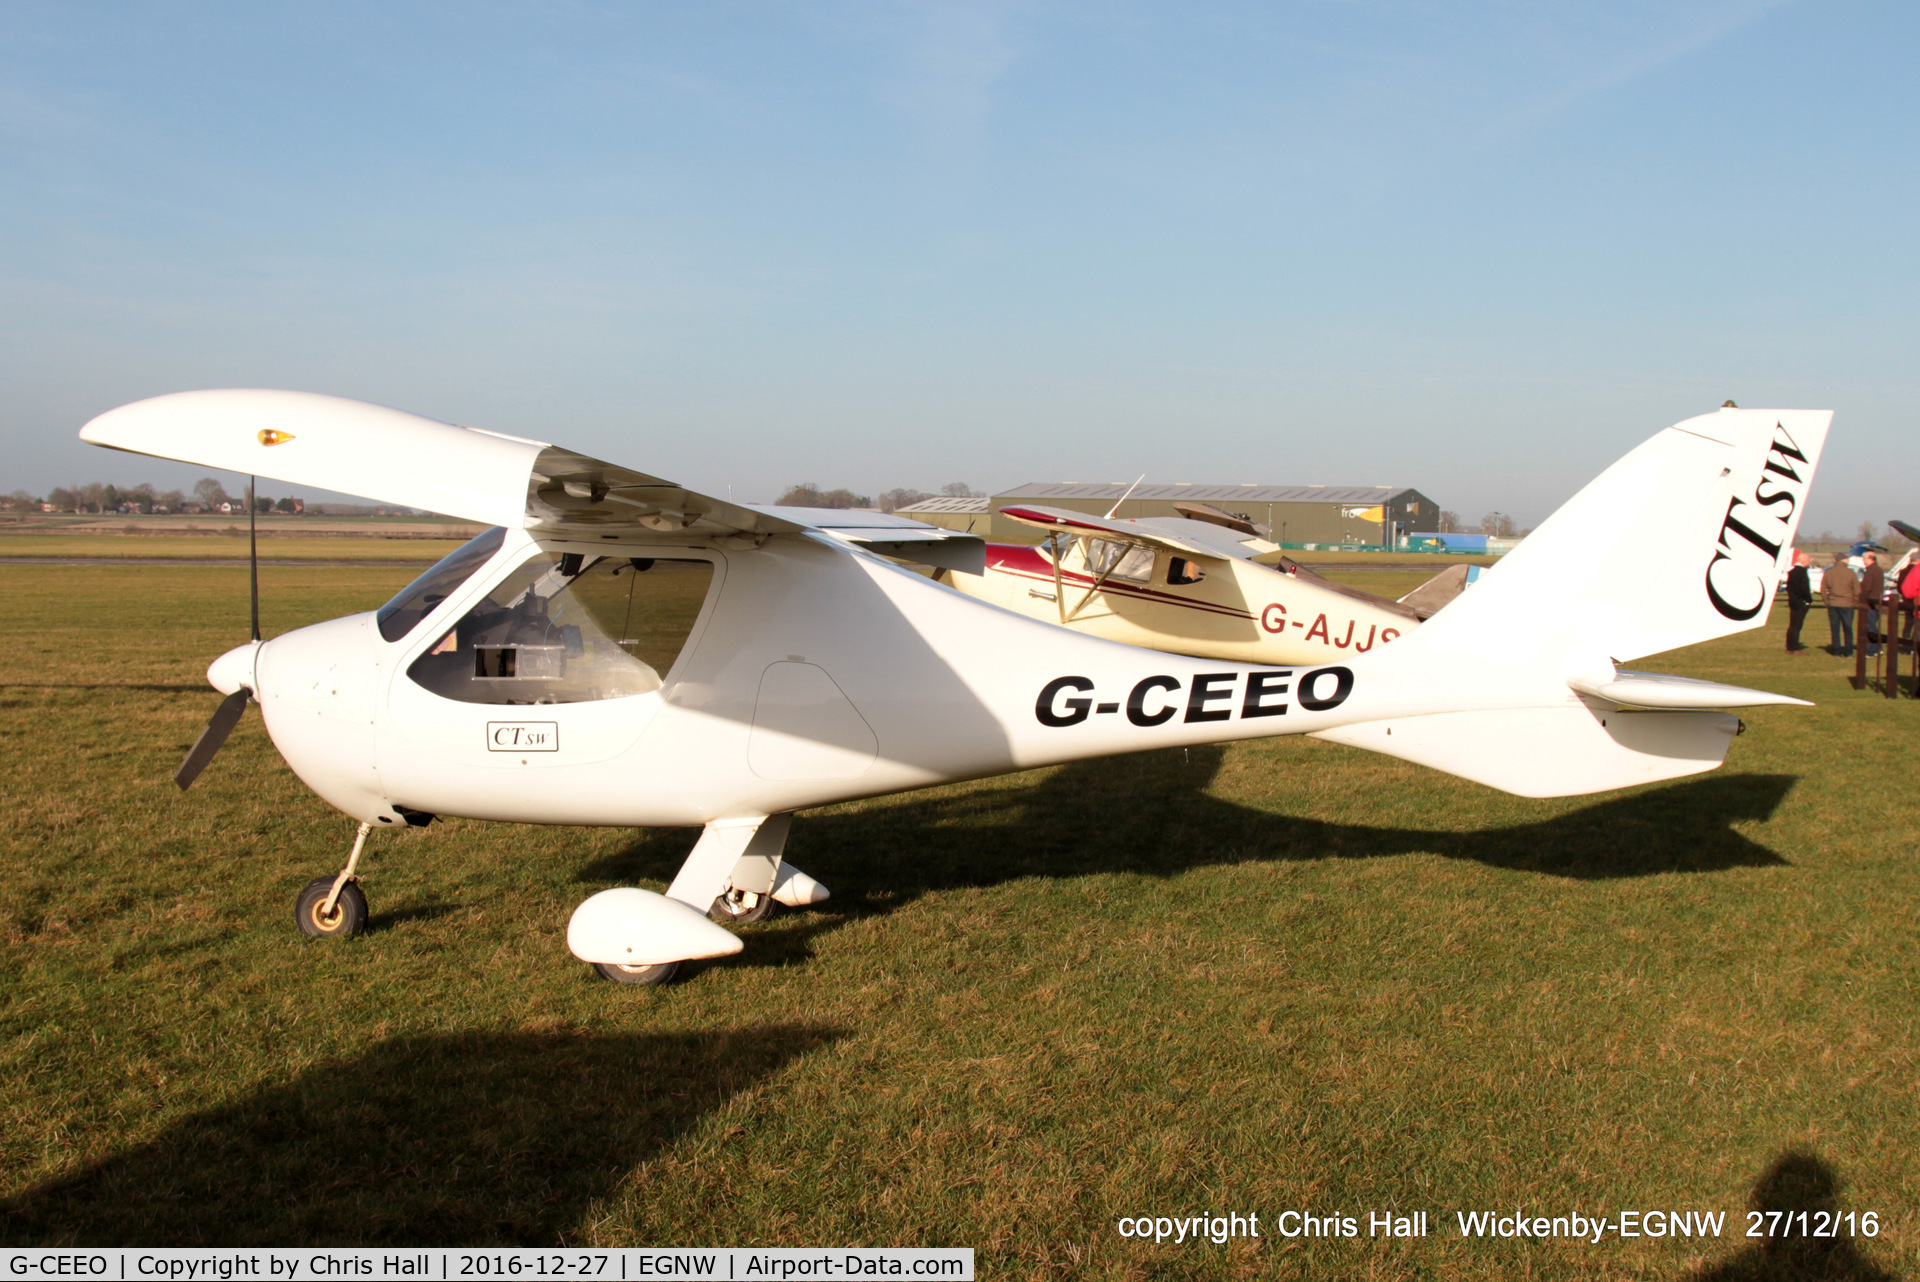 G-CEEO, 2006 Flight Design CTSW C/N 8225, at the Wickenby 